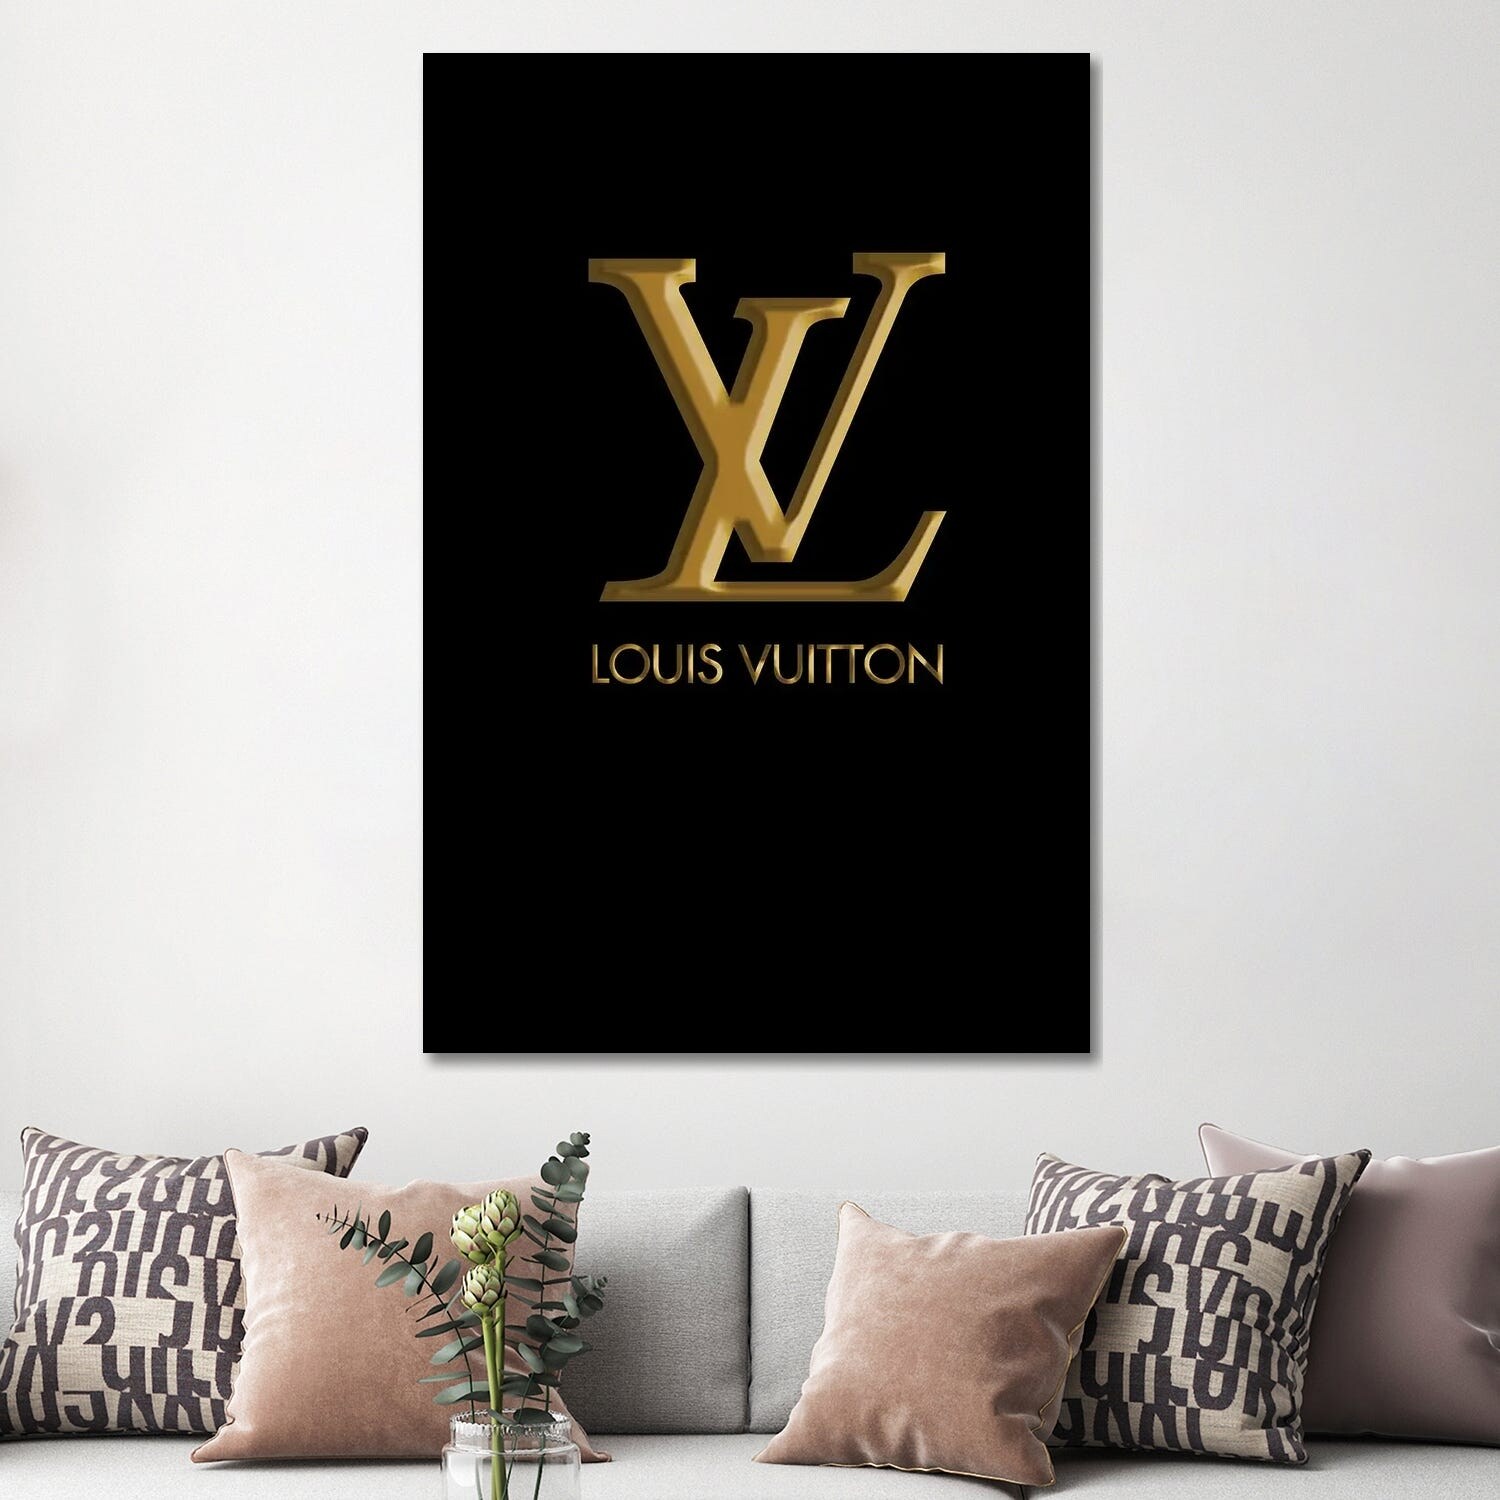 iCanvas LOUIS VUITTON Pink by Art Mirano Canvas Print - On Sale